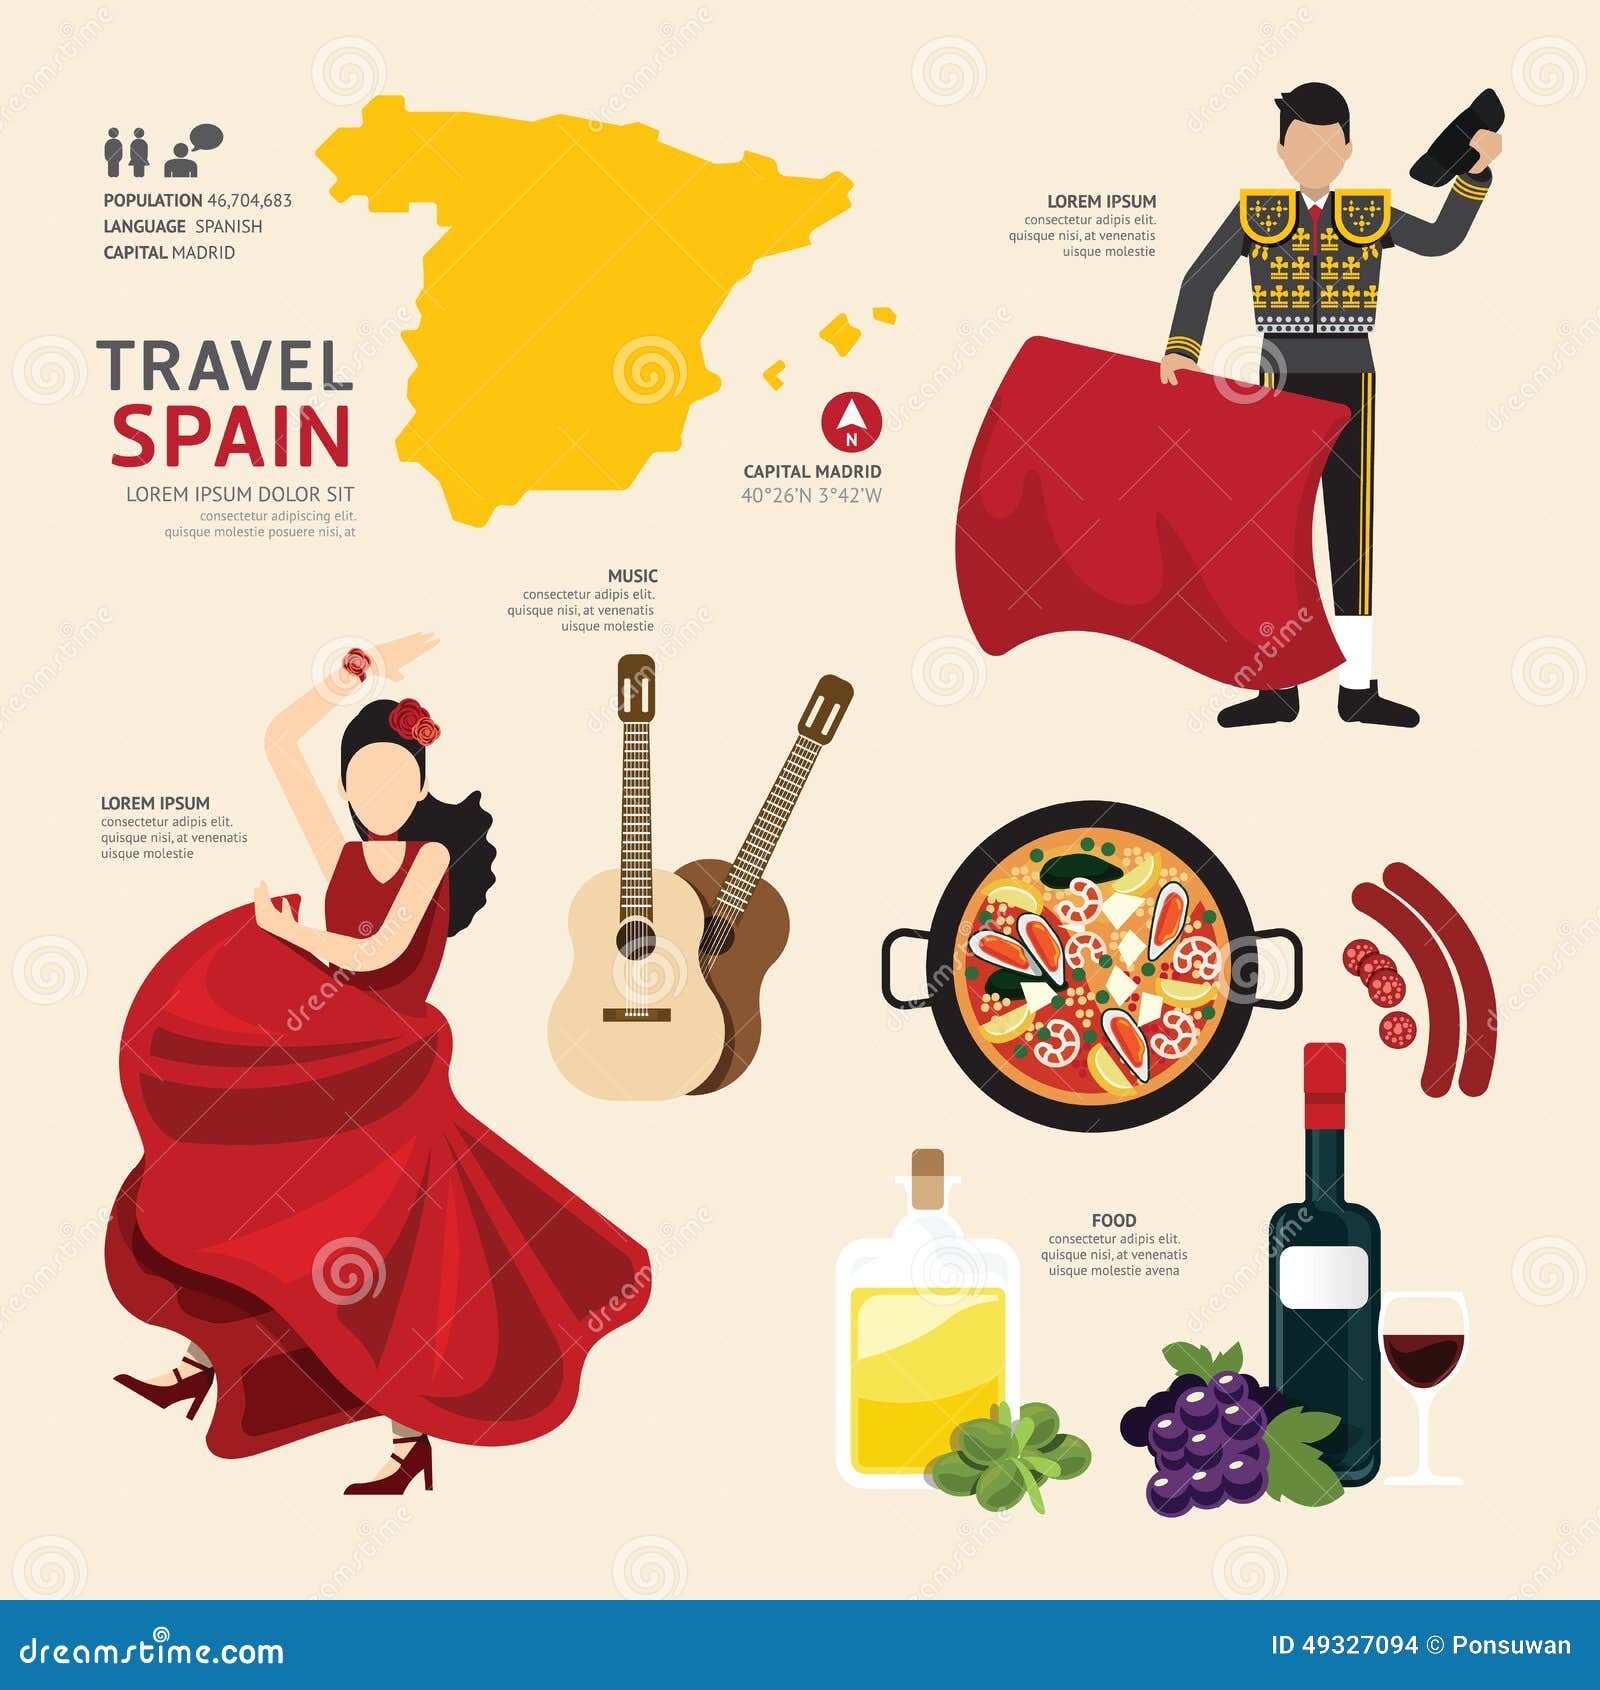 http://www.huffingtonpost.com/entry/things-americans-can-learn-from-spain_5679729be4b0b958f657fb28?utm_hp_ref=spain